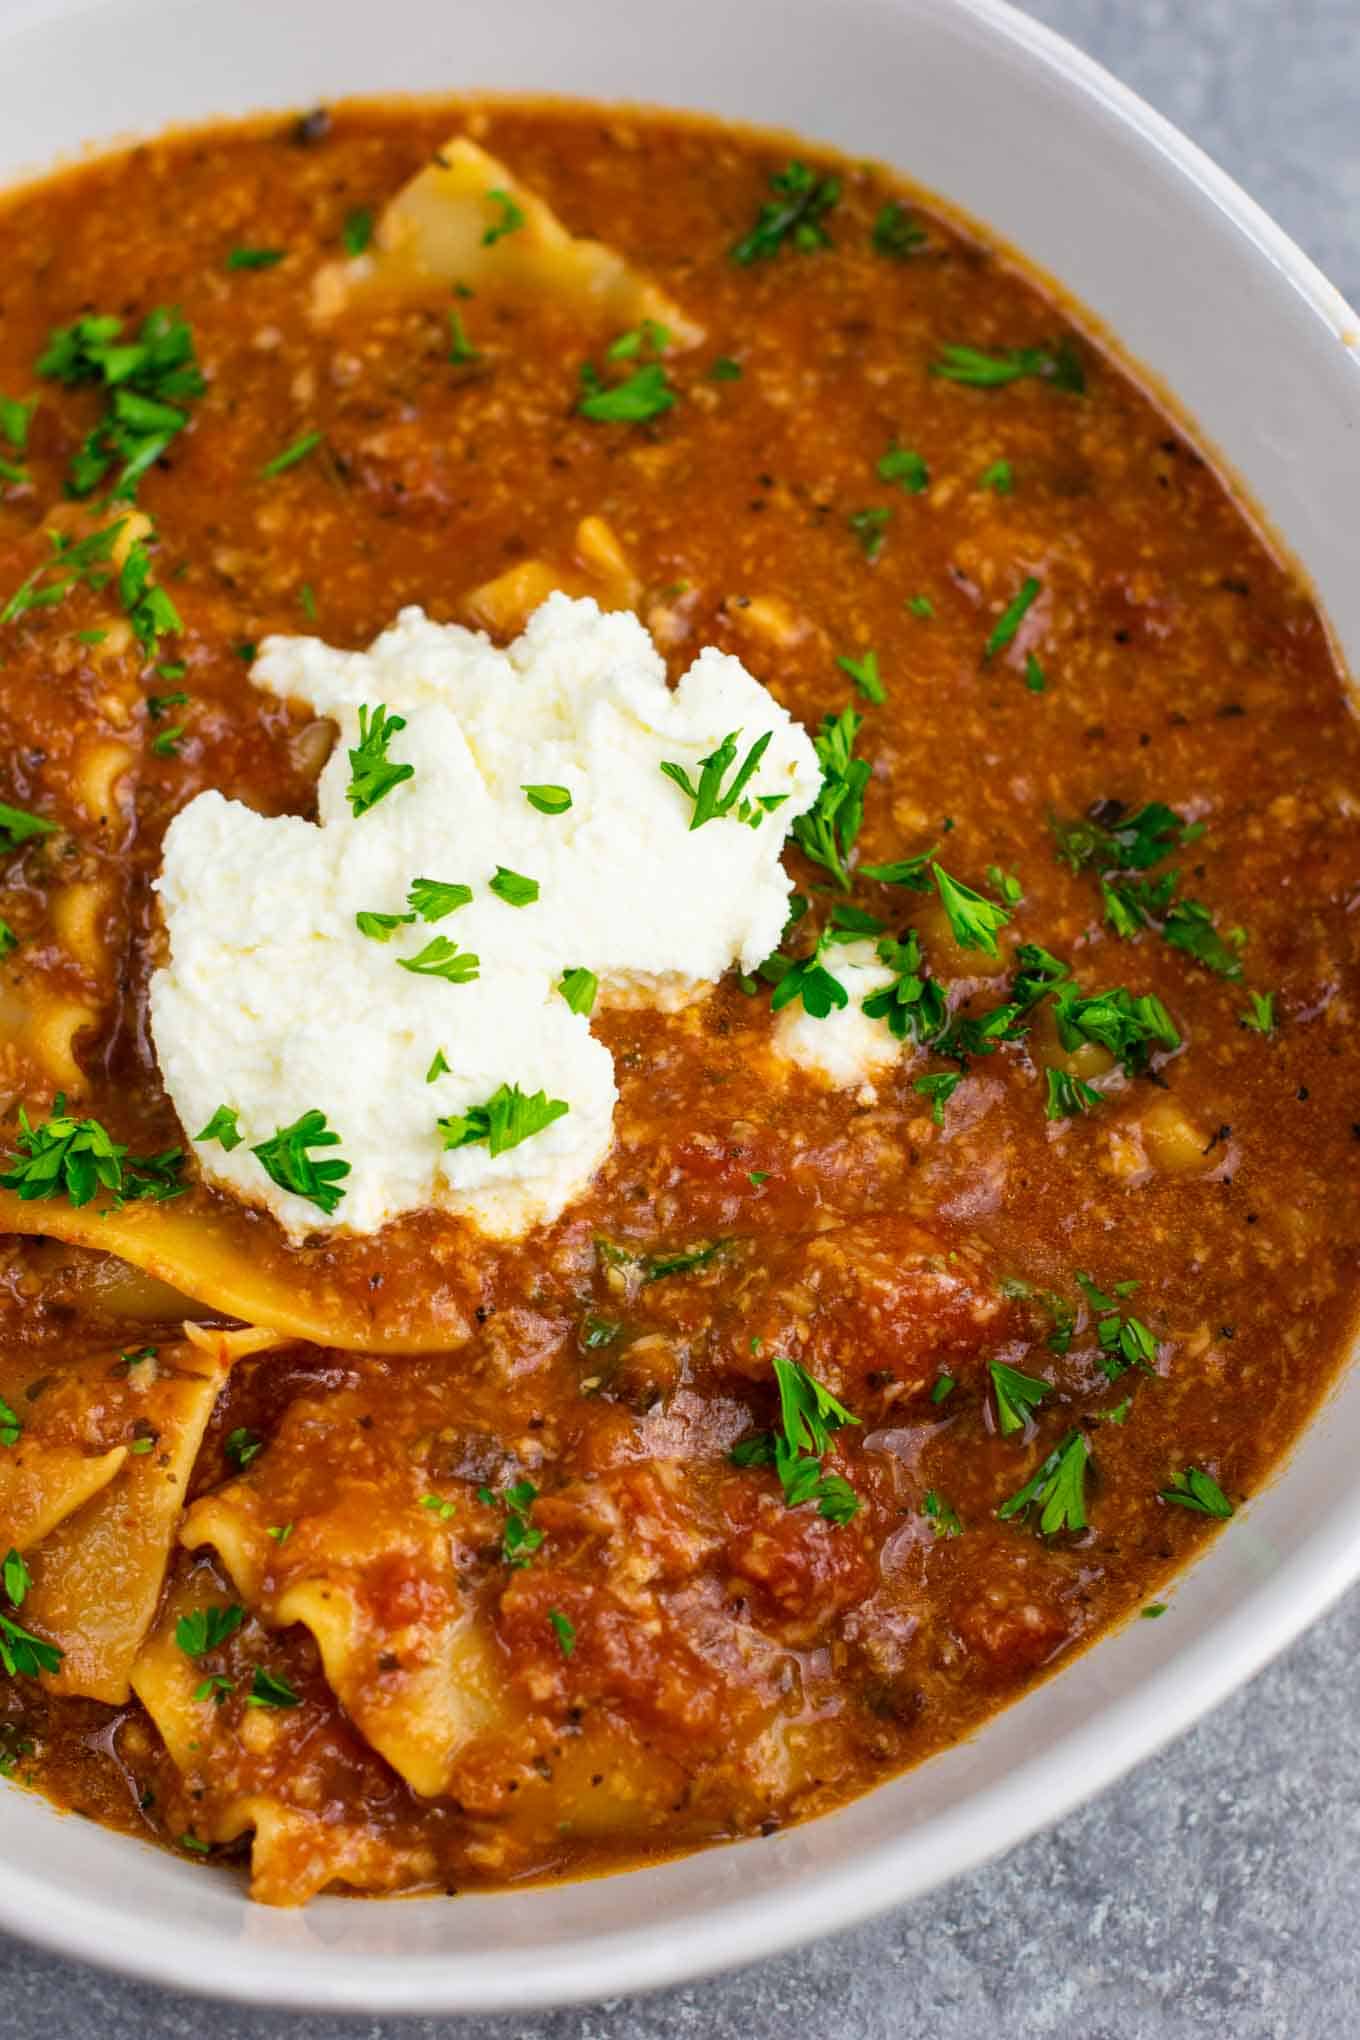 Easy one pot lasagna soup recipe (vegetarian) Ready in just 30 minutes, this is a quick and delicious meatless dinner recipe! #lasagnasoup #vegetarian #meatless #healthyeating #healthyrecipe #dinnerrecipe #dinner